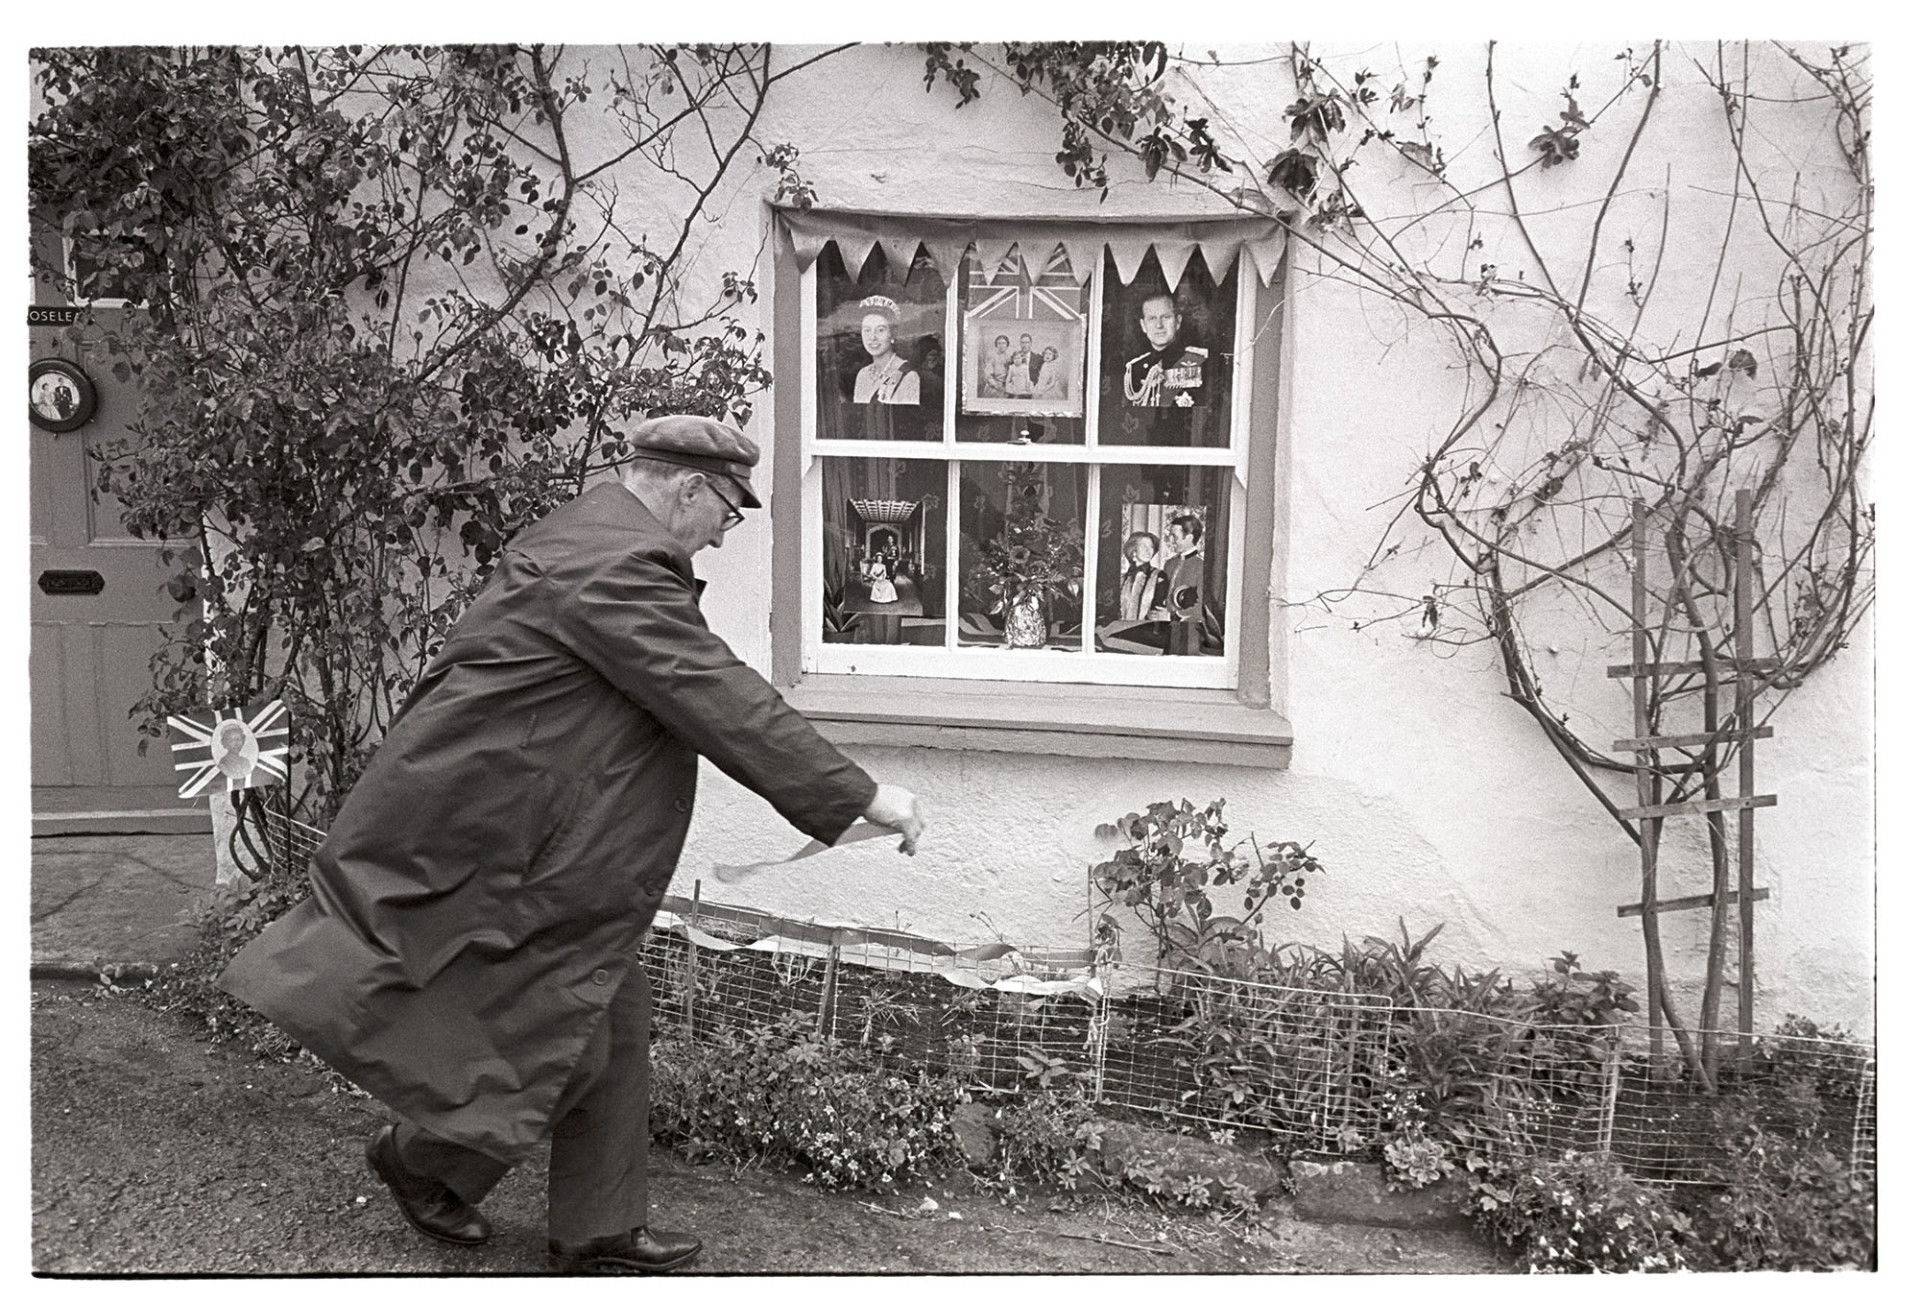 Man decorating house for Jubilee.
[Jack Marden decorating his house and garden at Rose Cottage, Aller Road, Dolton for the Silver Jubilee of Queen Elizabeth II. There are photographs and bunting in his window.]